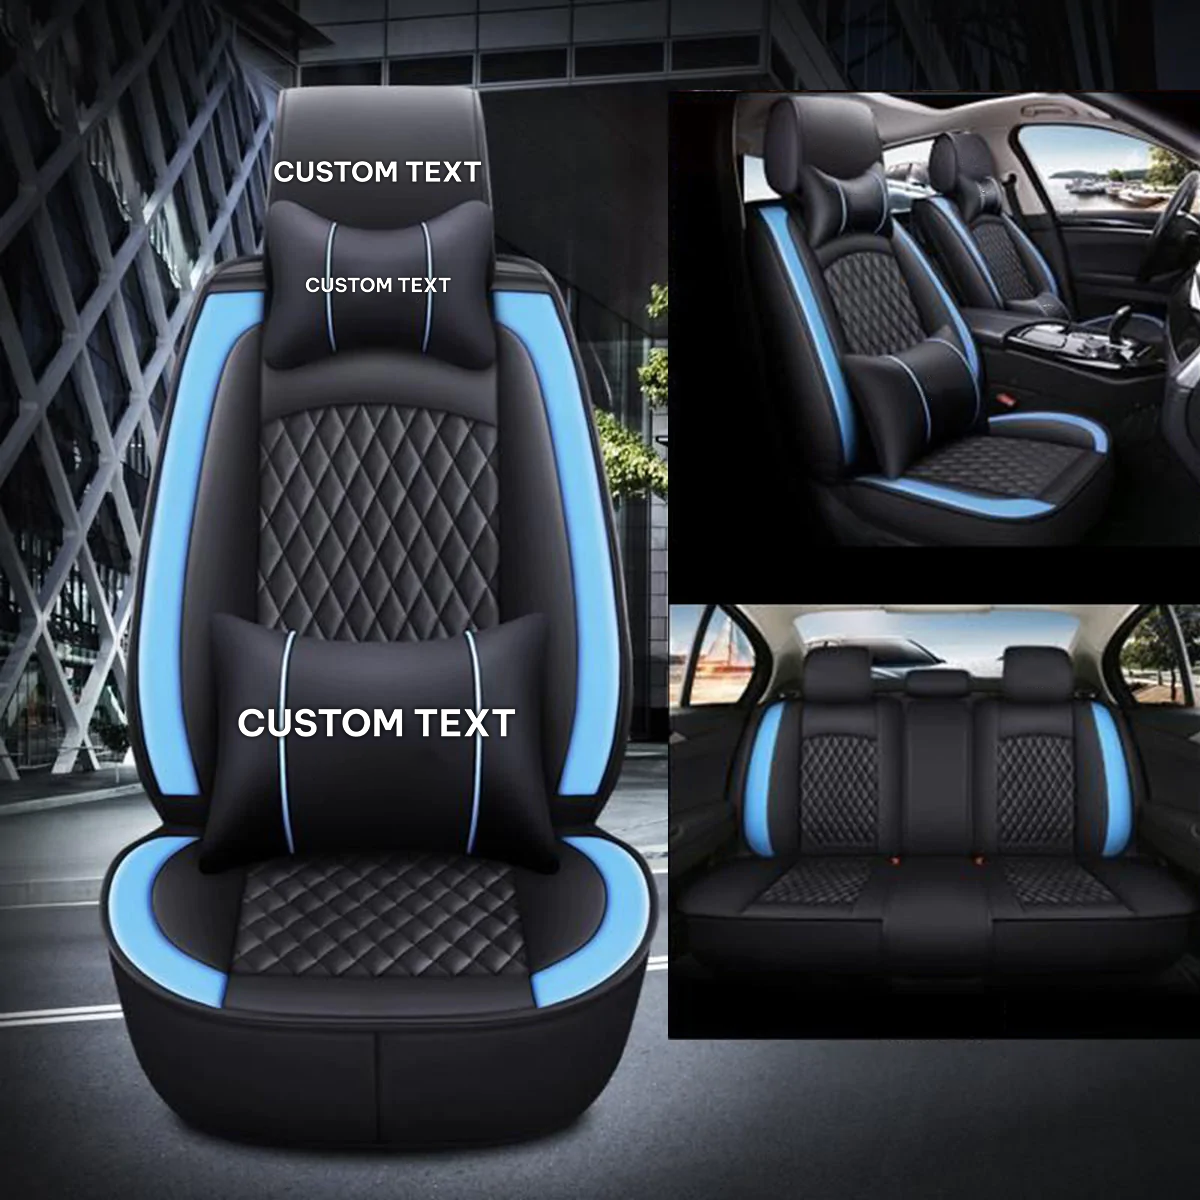 Custom Text For Seat Covers 5 Seats Full Set, Custom Fit For Your Cars, Leatherette Automotive Seat Cushion Protector Universal Fit, Vehicle Auto Interior Decor CA13988